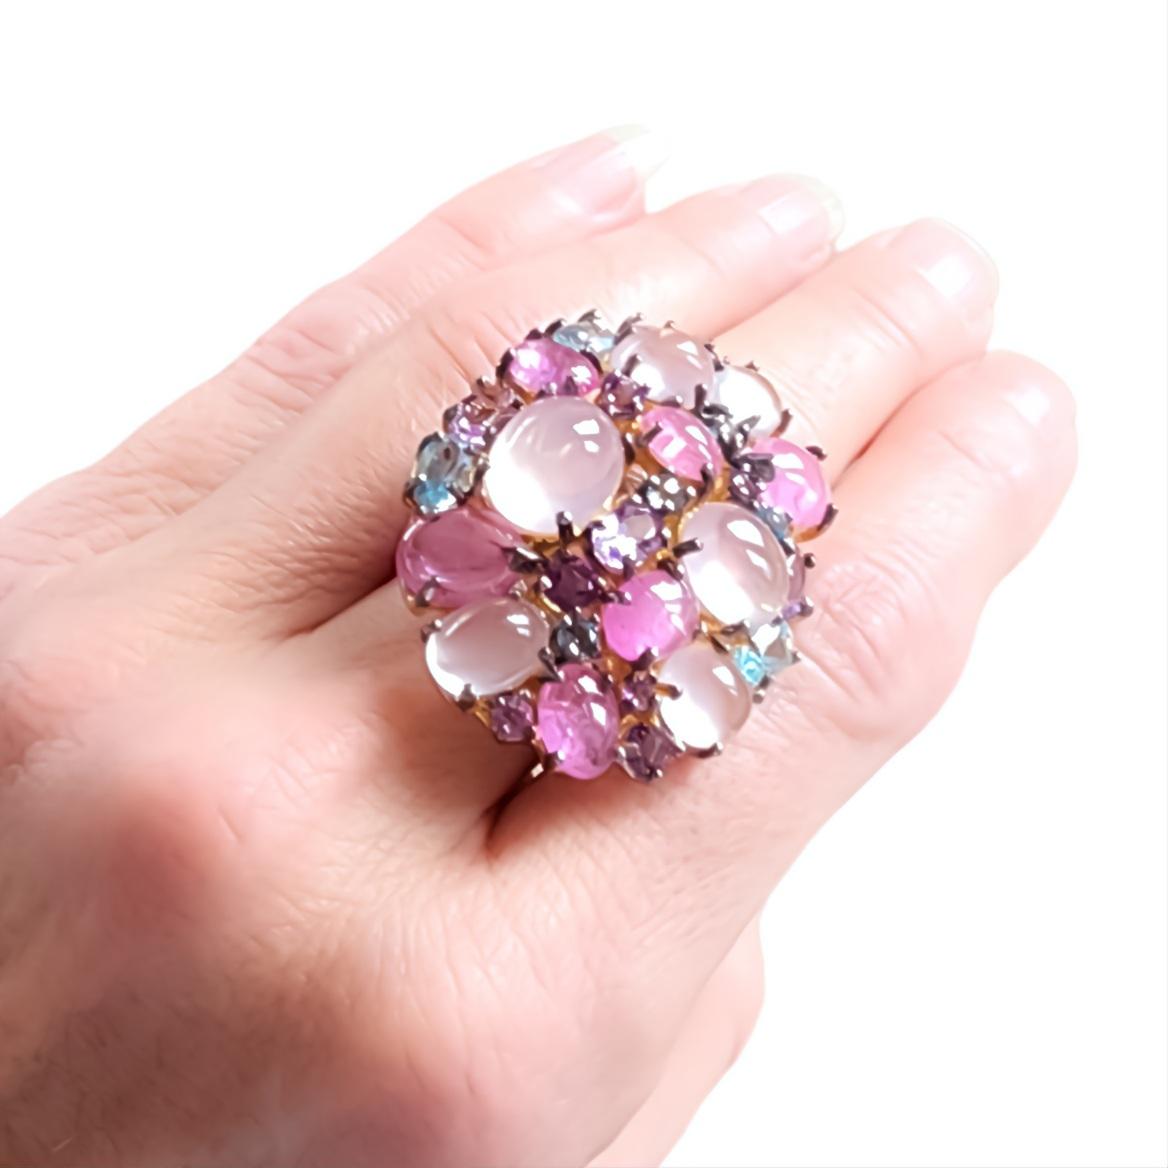 Mixed Cut  31 Carat Multi Gemstone Statement Cocktail Ring Pink Blue Purple Gems Silver For Sale